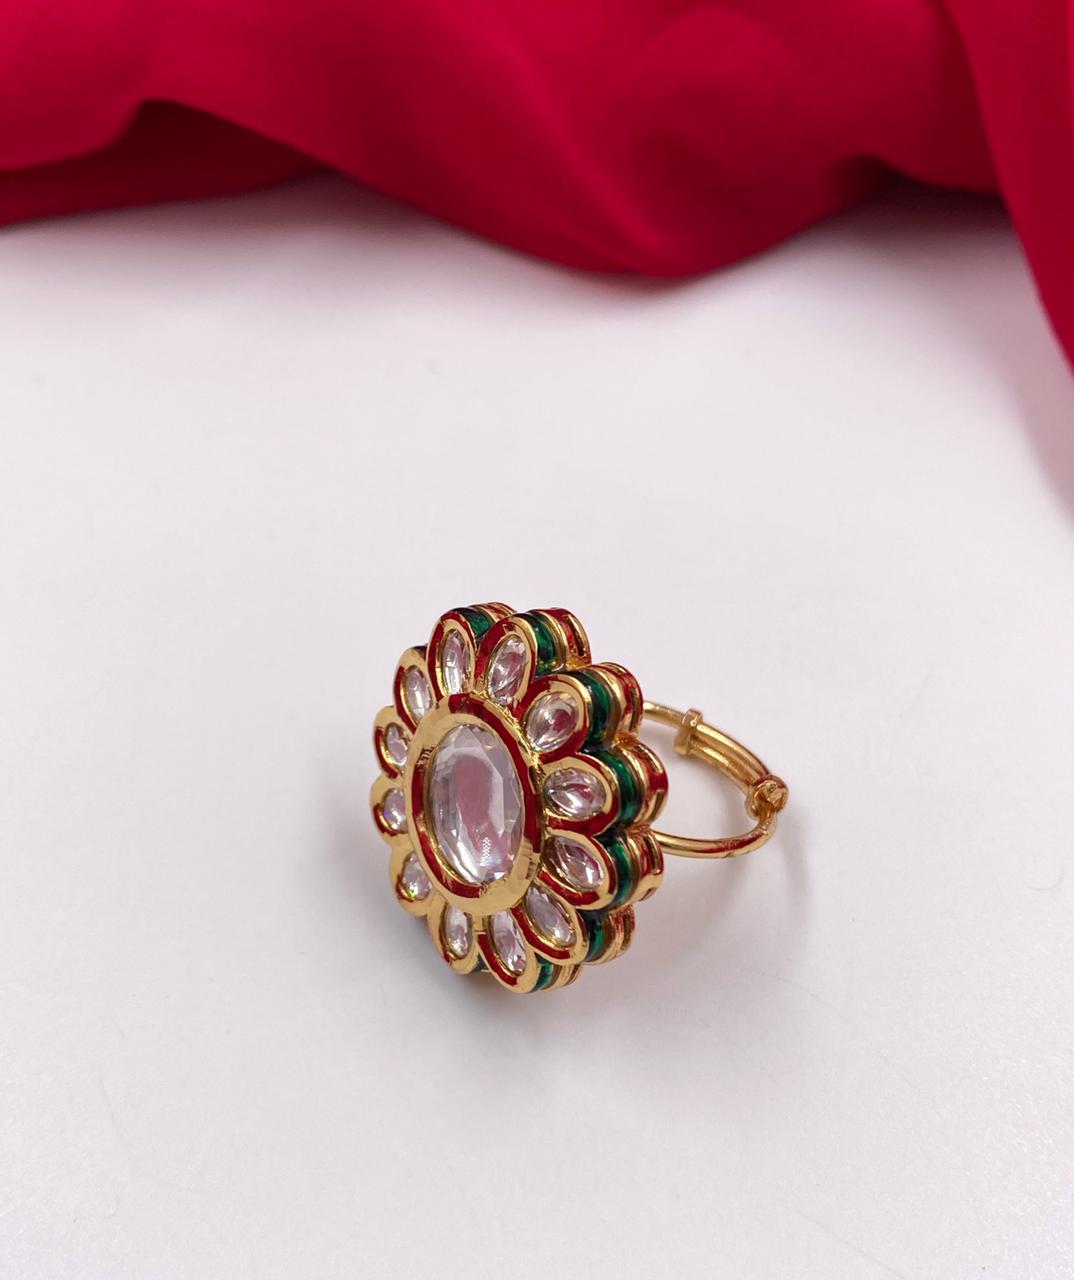 Priyaasi Gold Plated Ring with Kundan Studded for Women, Girls - Adjustable  Round Design Finger Rings : Amazon.in: Fashion